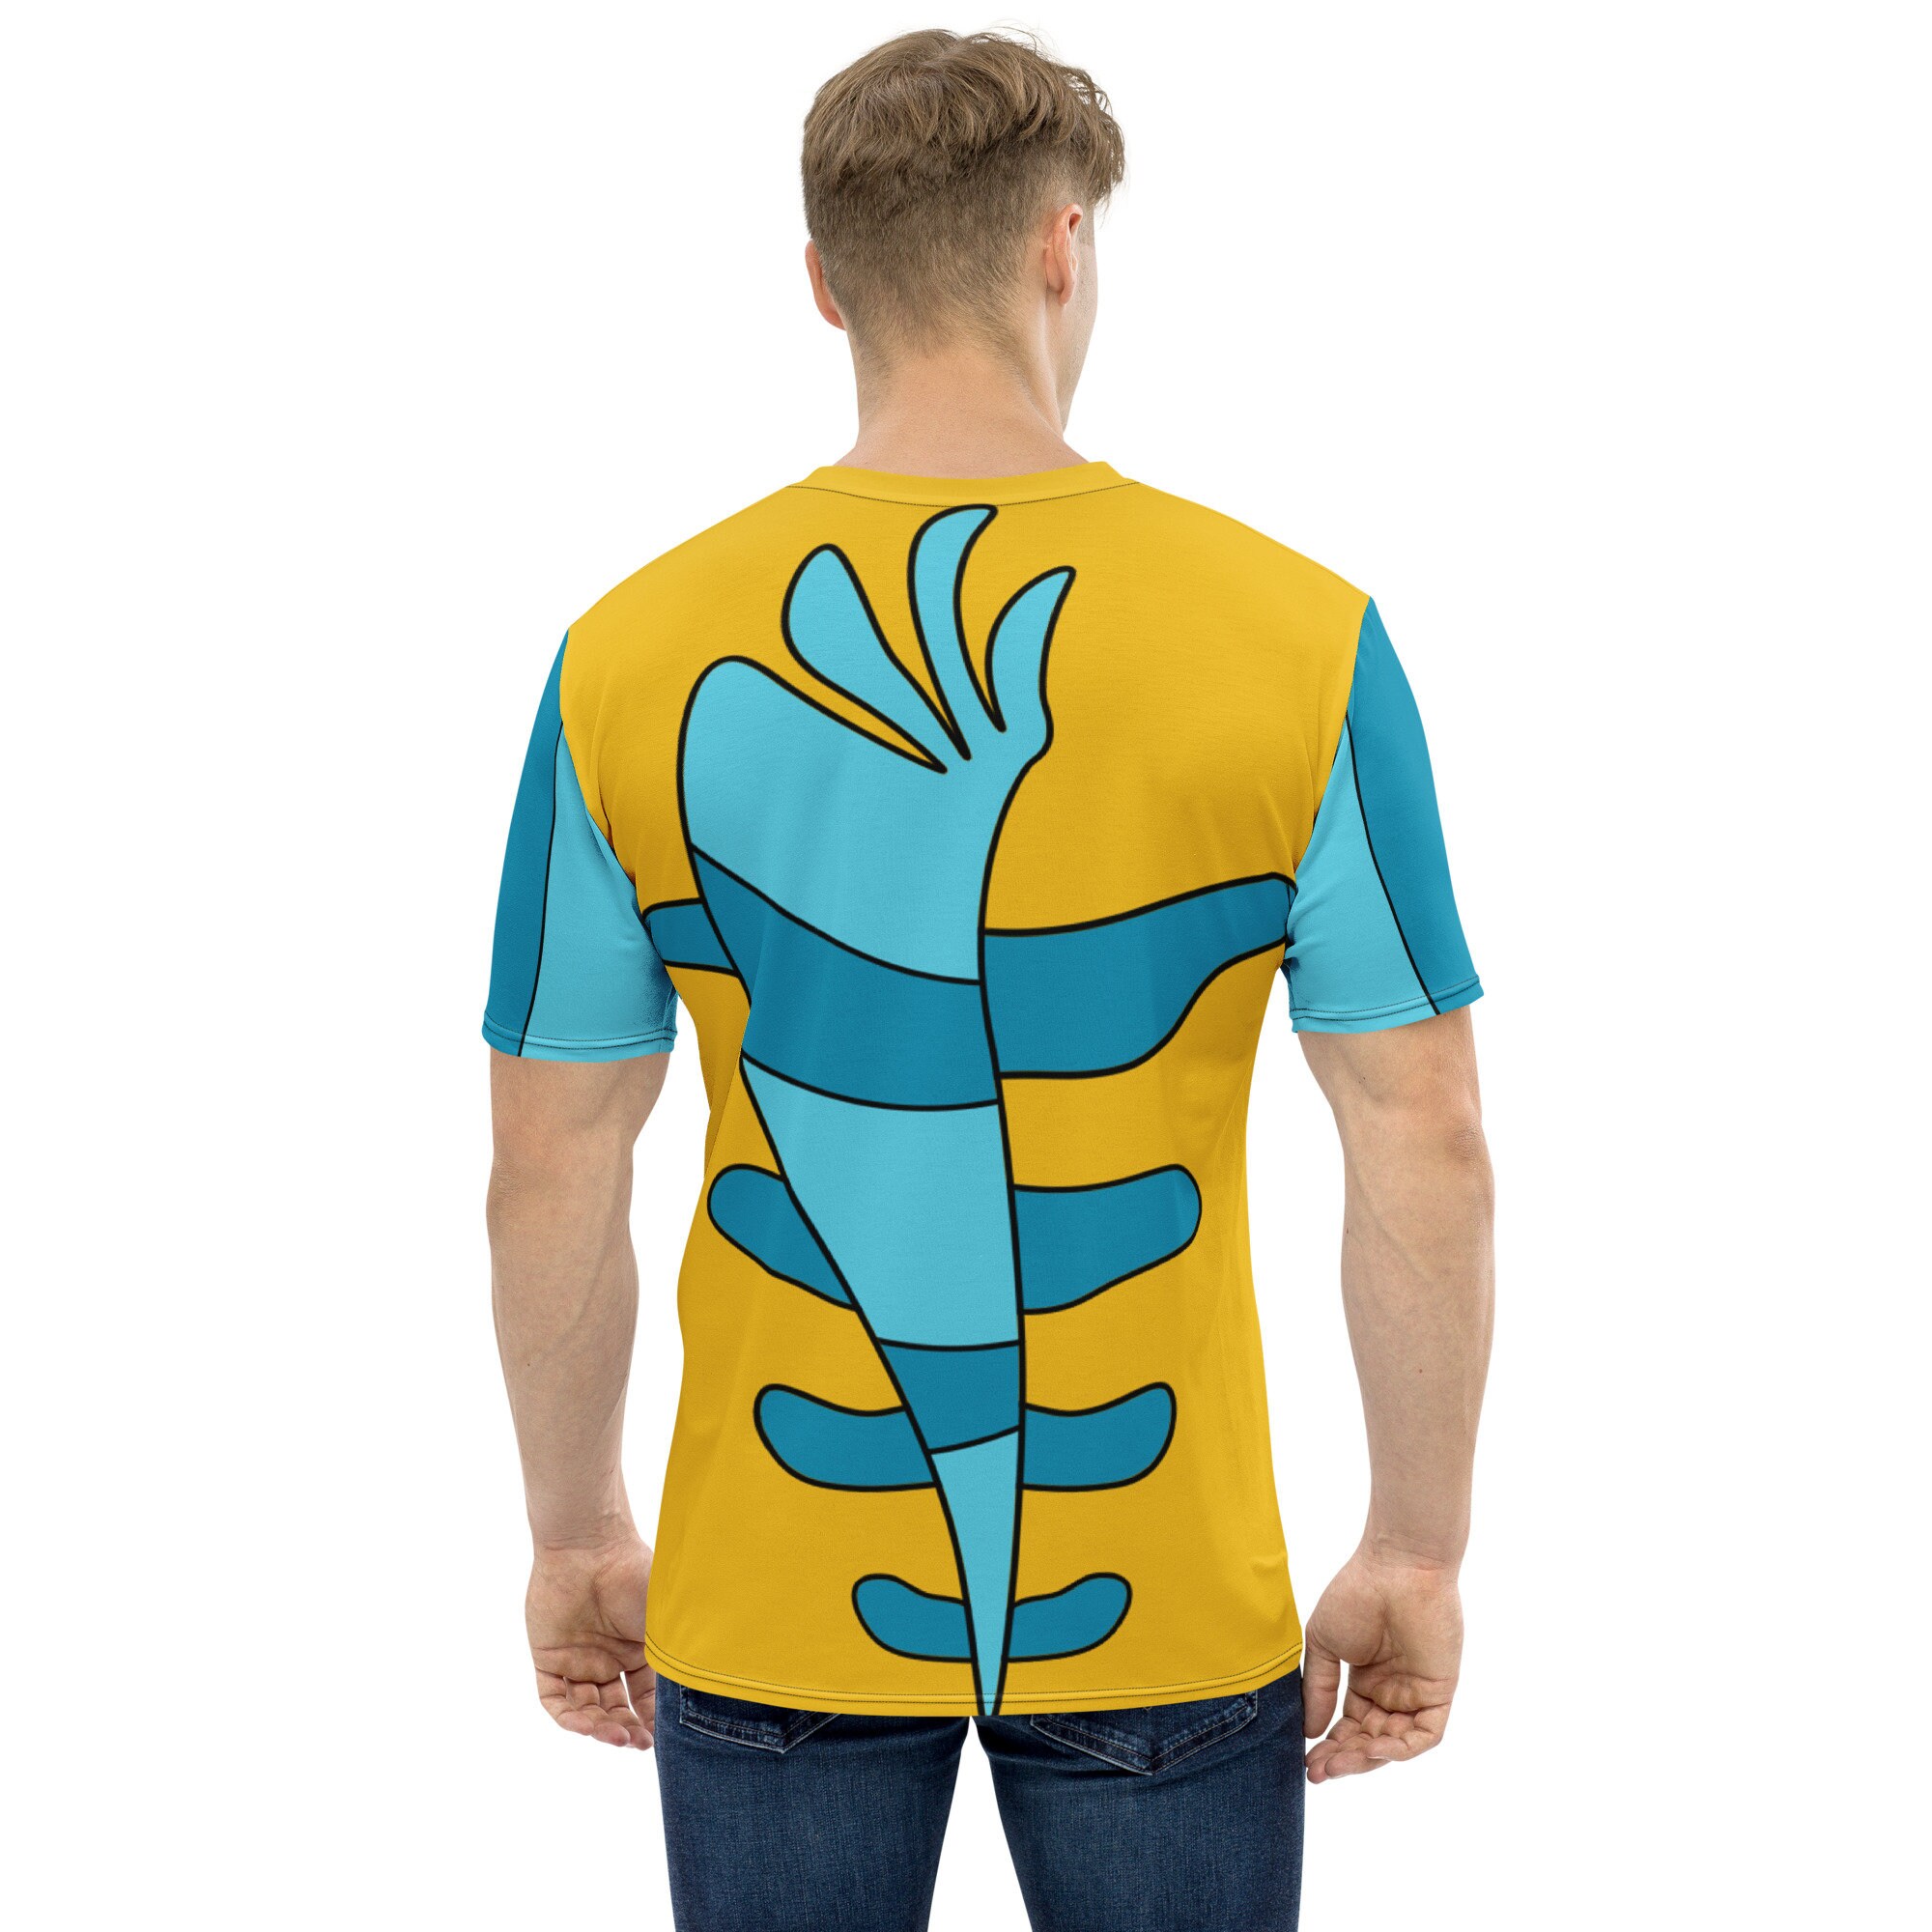 3D Shirt Inspired by Flounder from The Little Mermaid